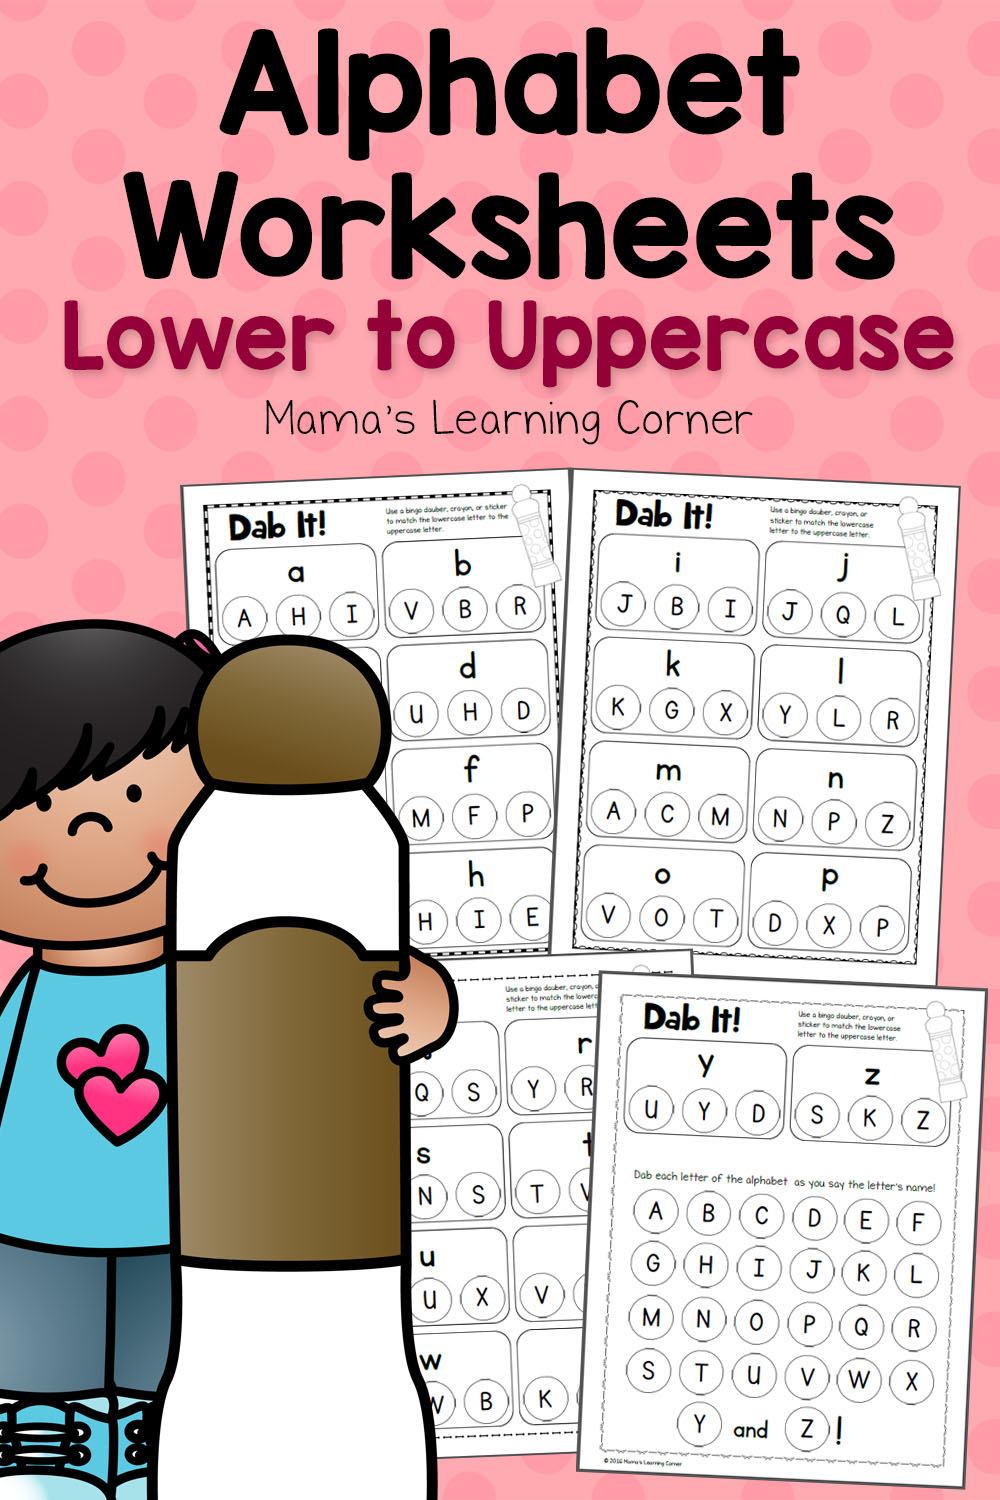 Dab It! Alphabet Worksheets - Match Lower and Uppercase Letters - Mamas